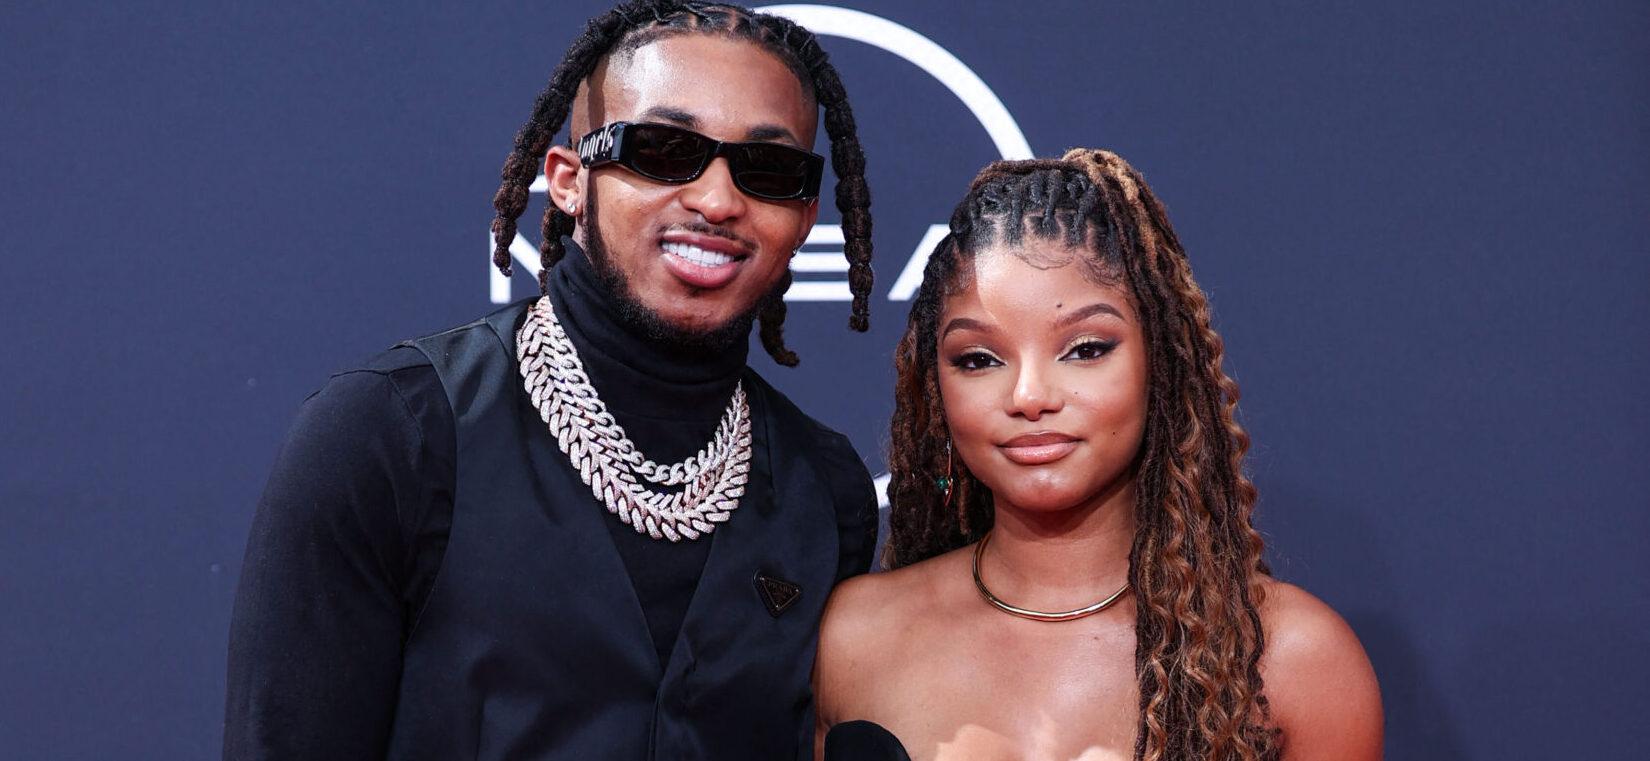 Halle Bailey's Boyfriend Rapper DDG Disses Her In New Song For Kissing Onscreen